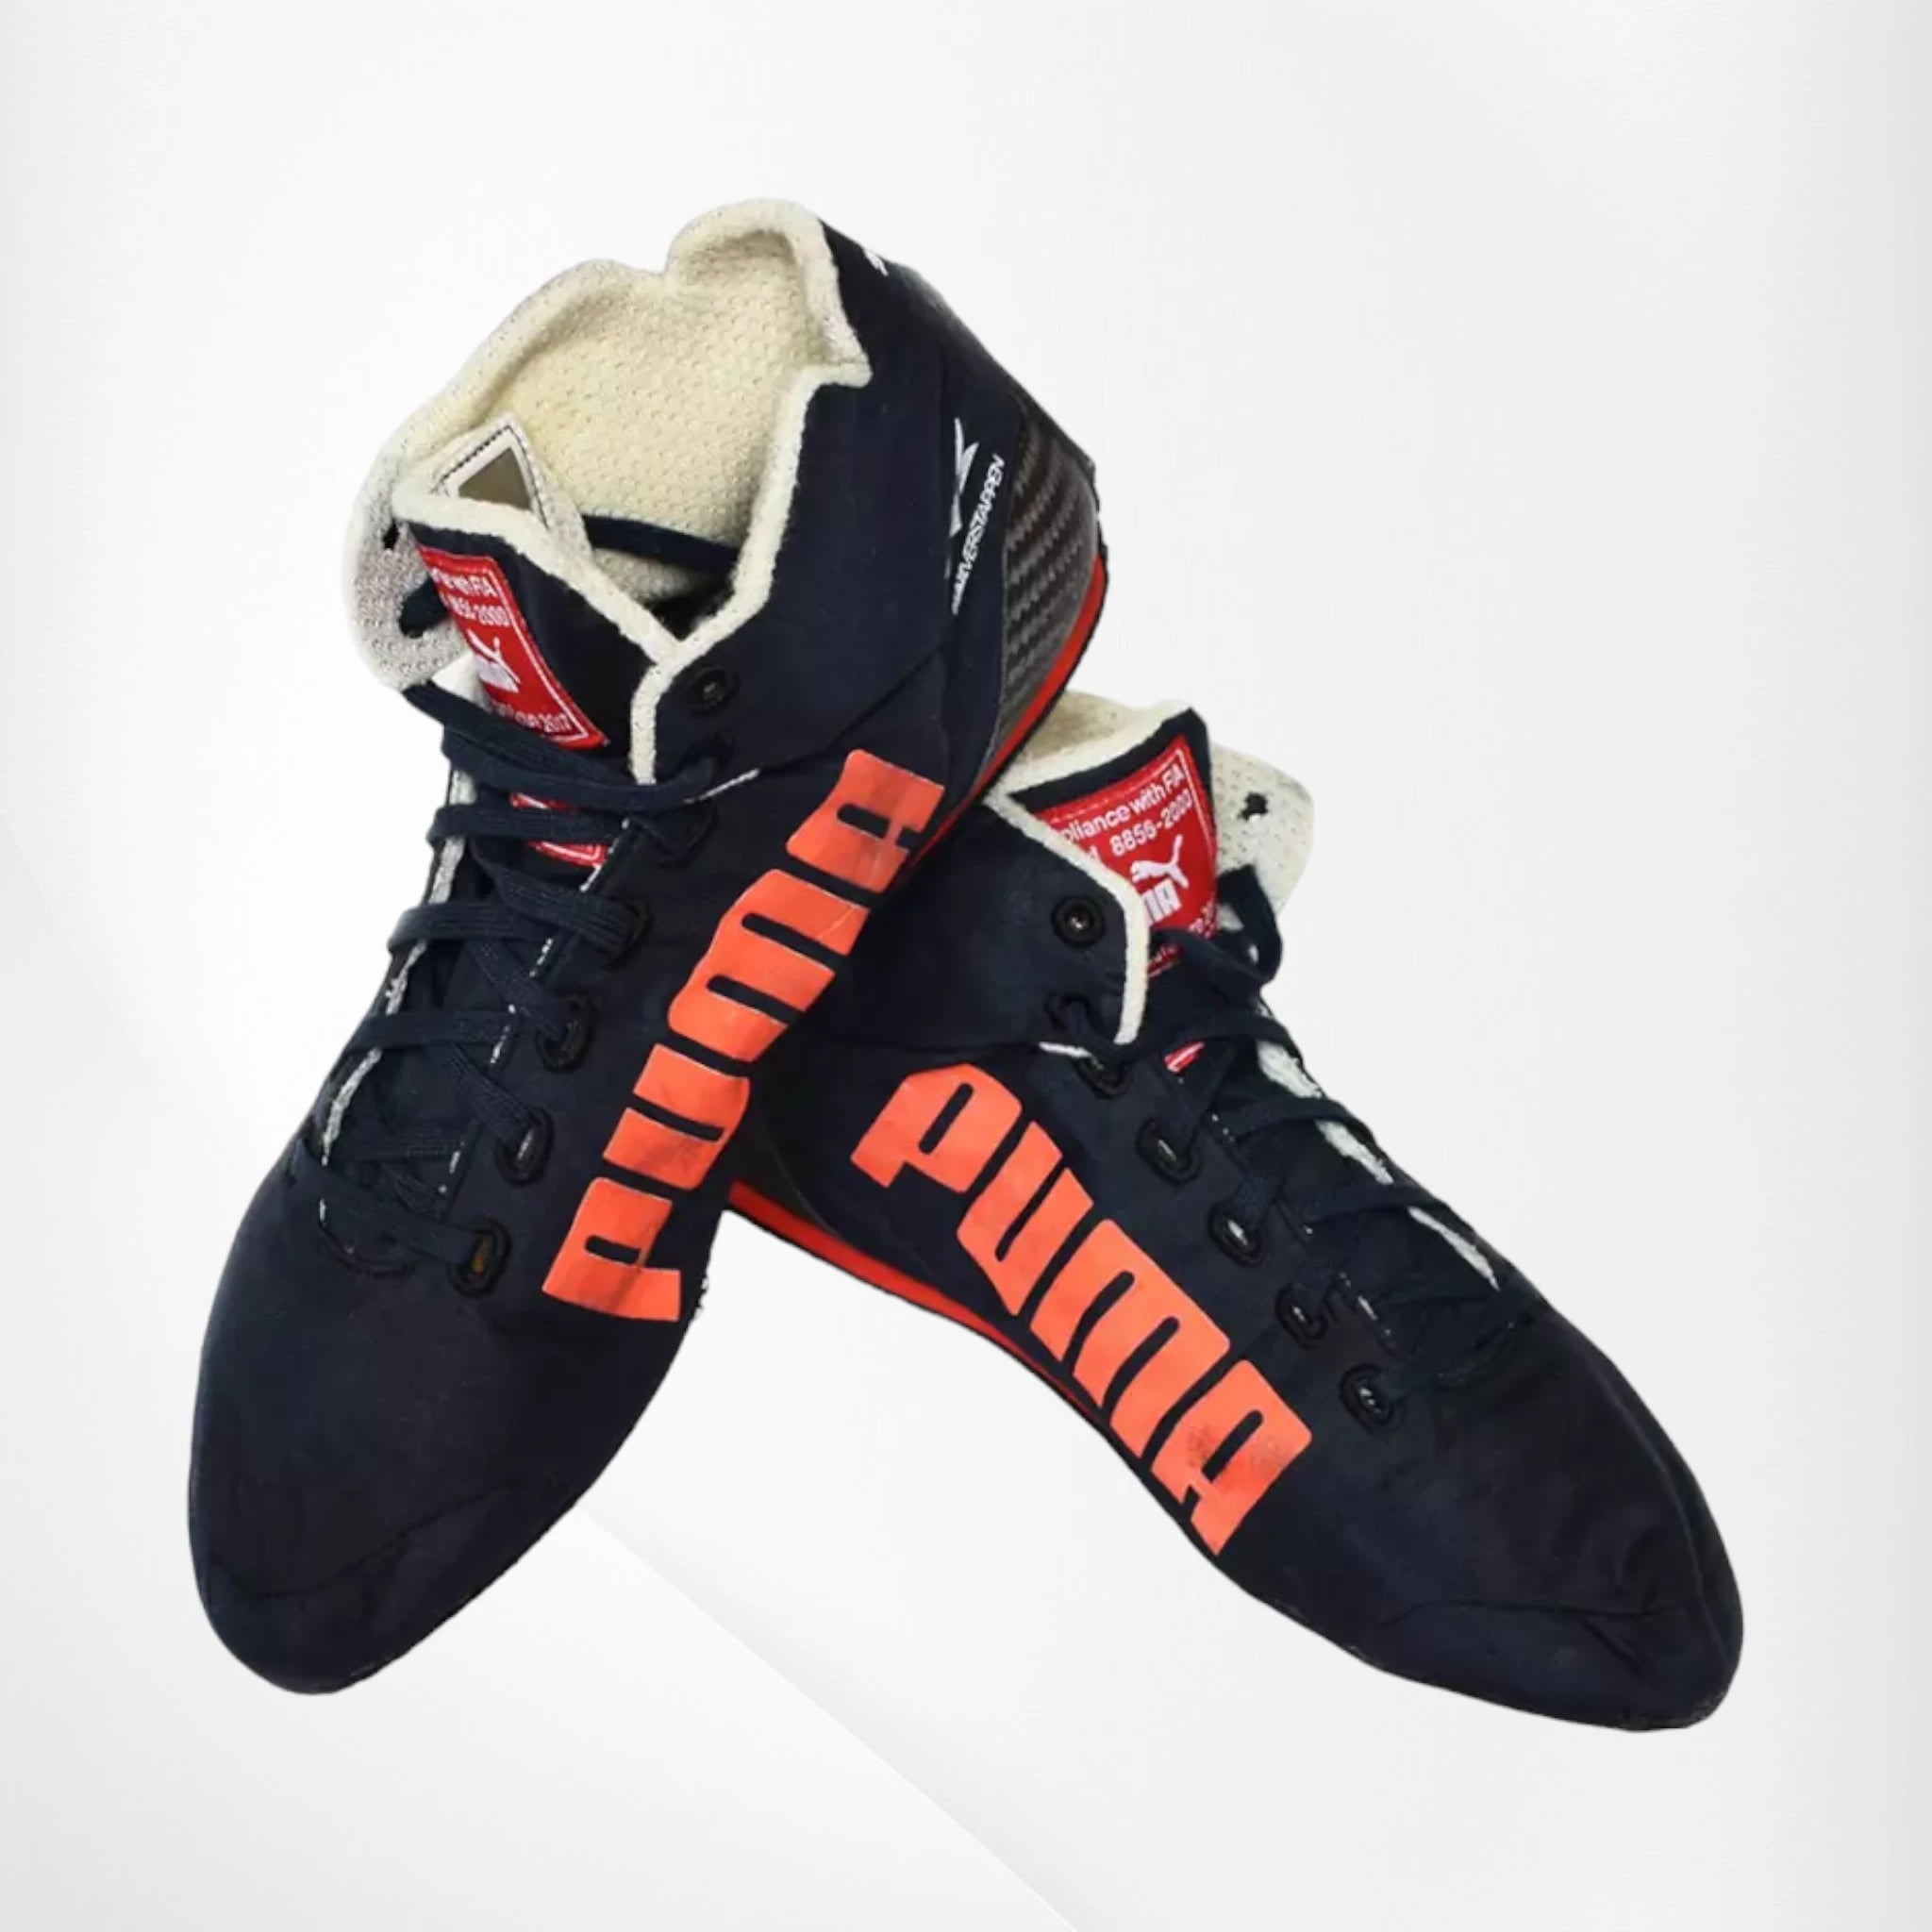 2019 Red Bull Pierre Gasly F1 Race Boots